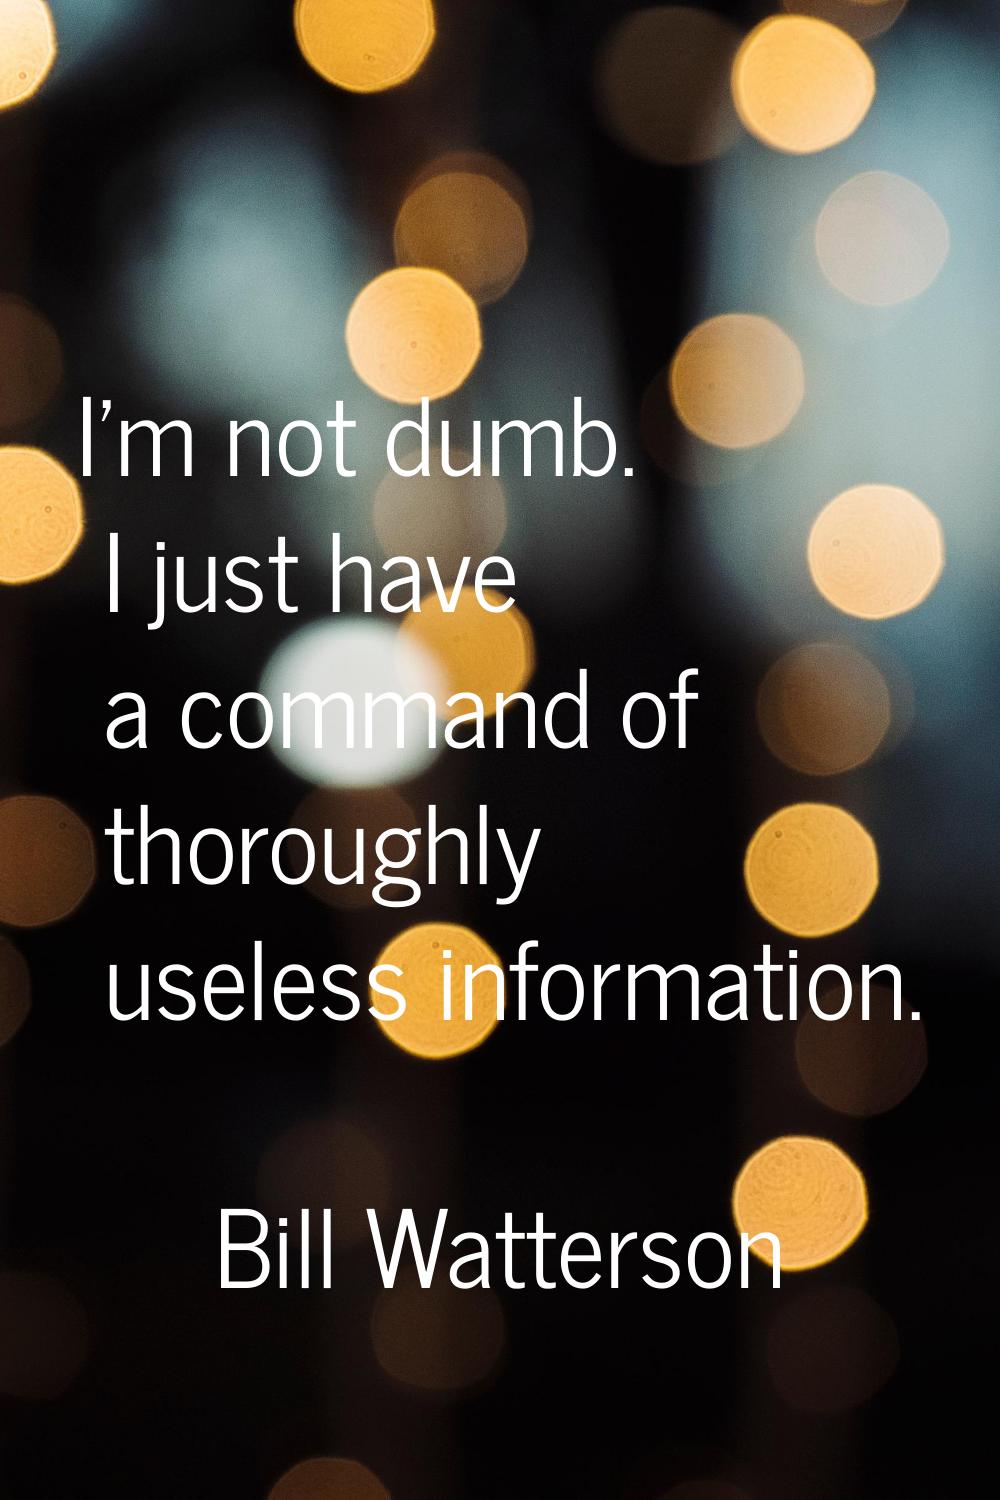 I'm not dumb. I just have a command of thoroughly useless information.